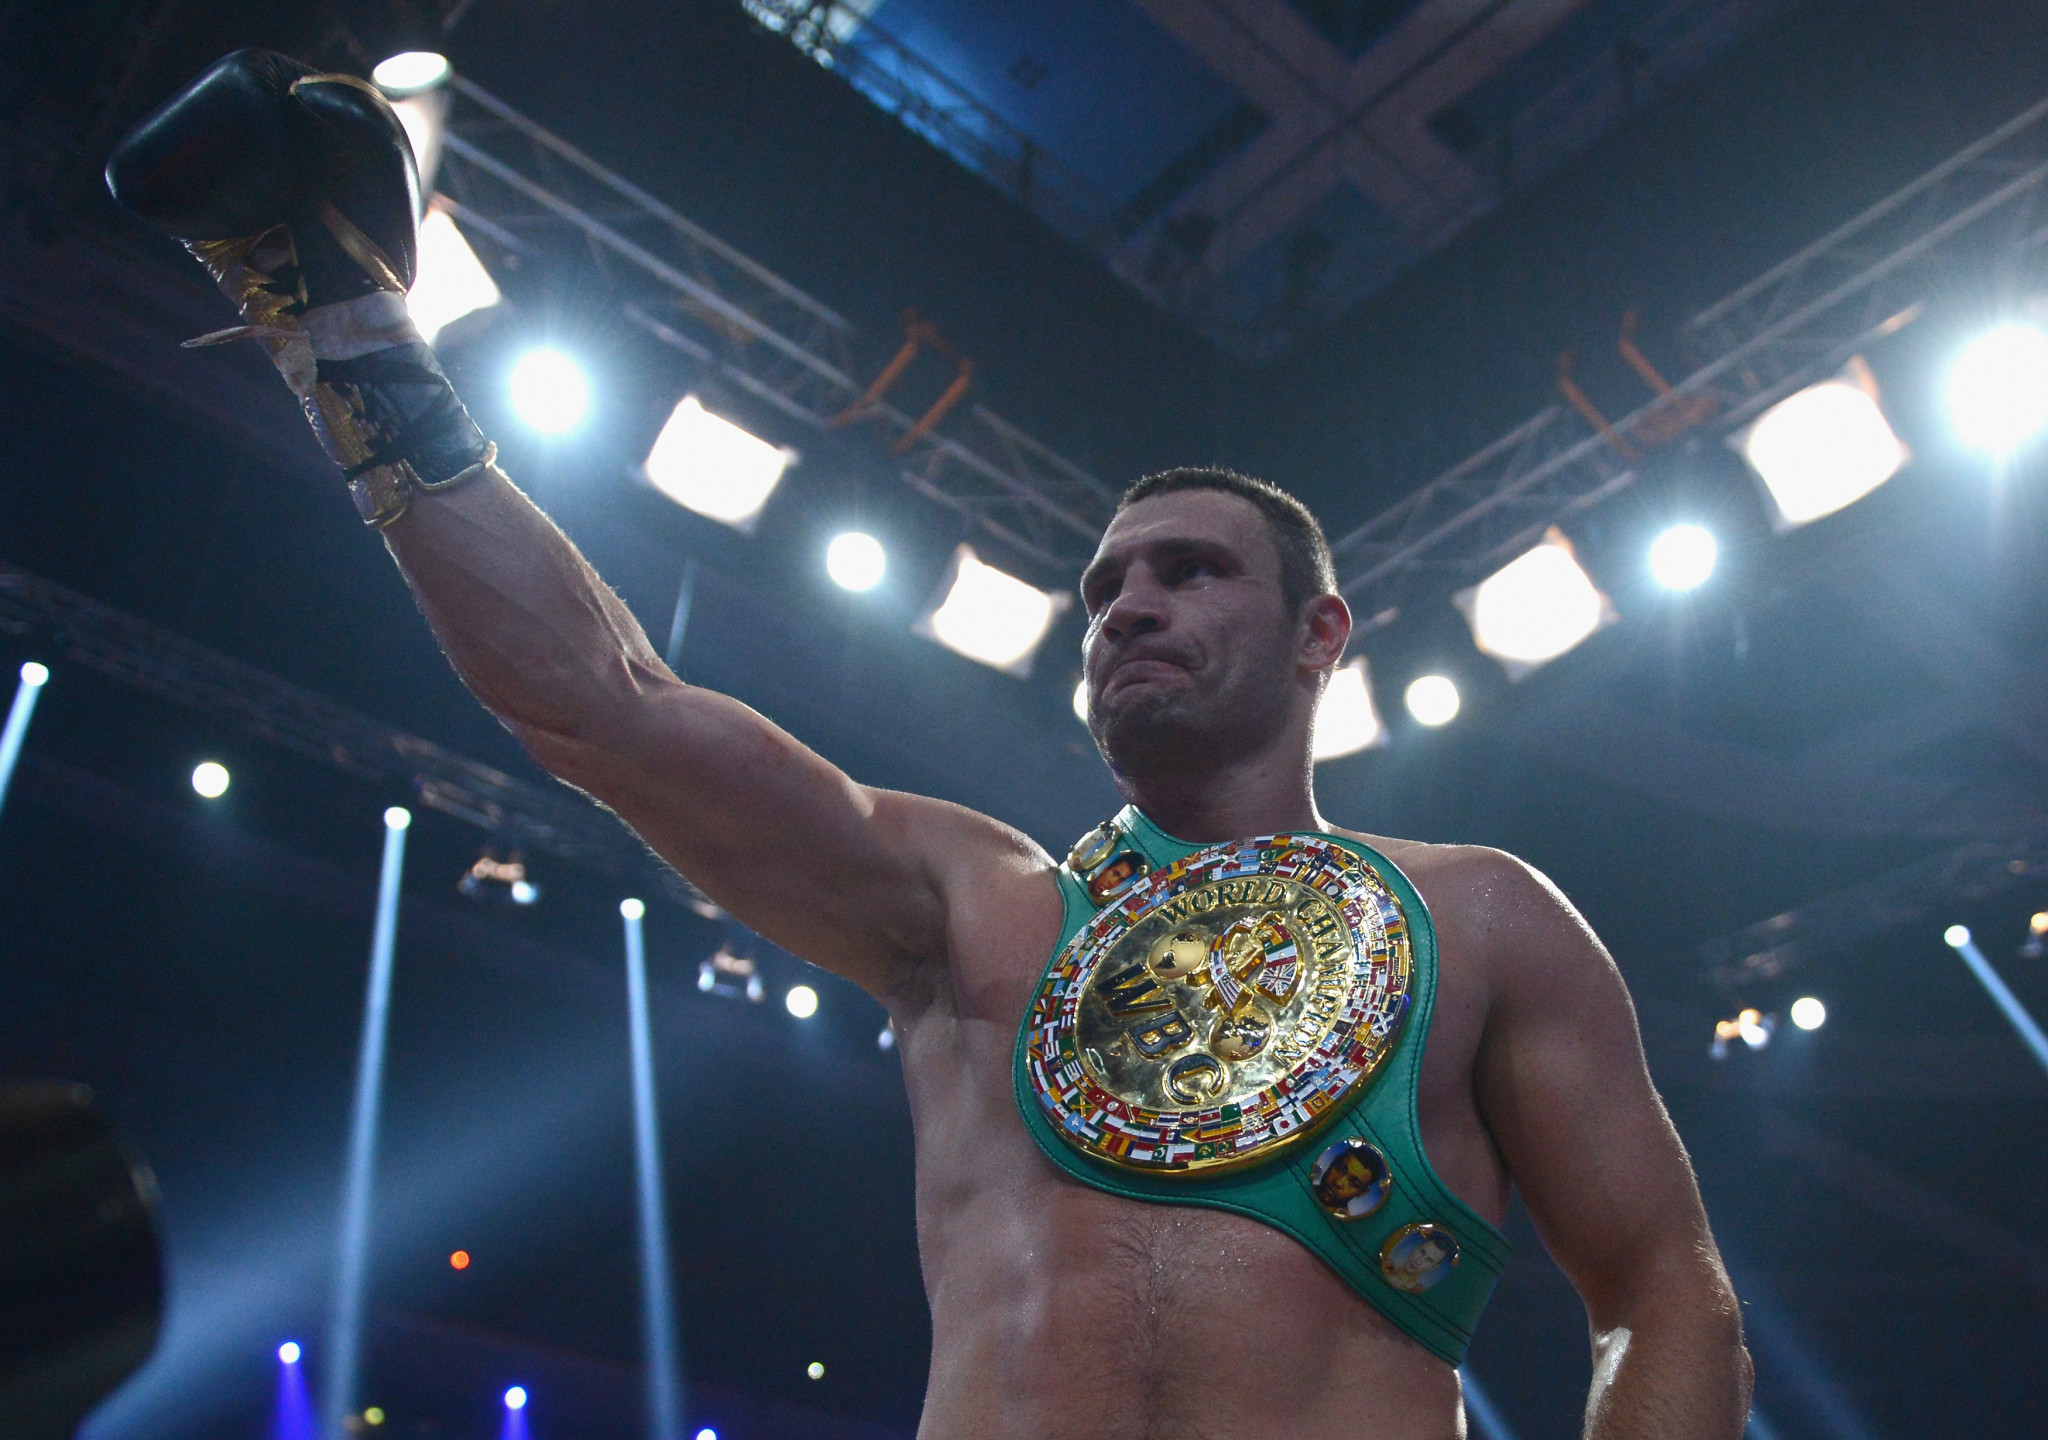 Vitali Klitschko has also faced drug controversy ©Getty Images